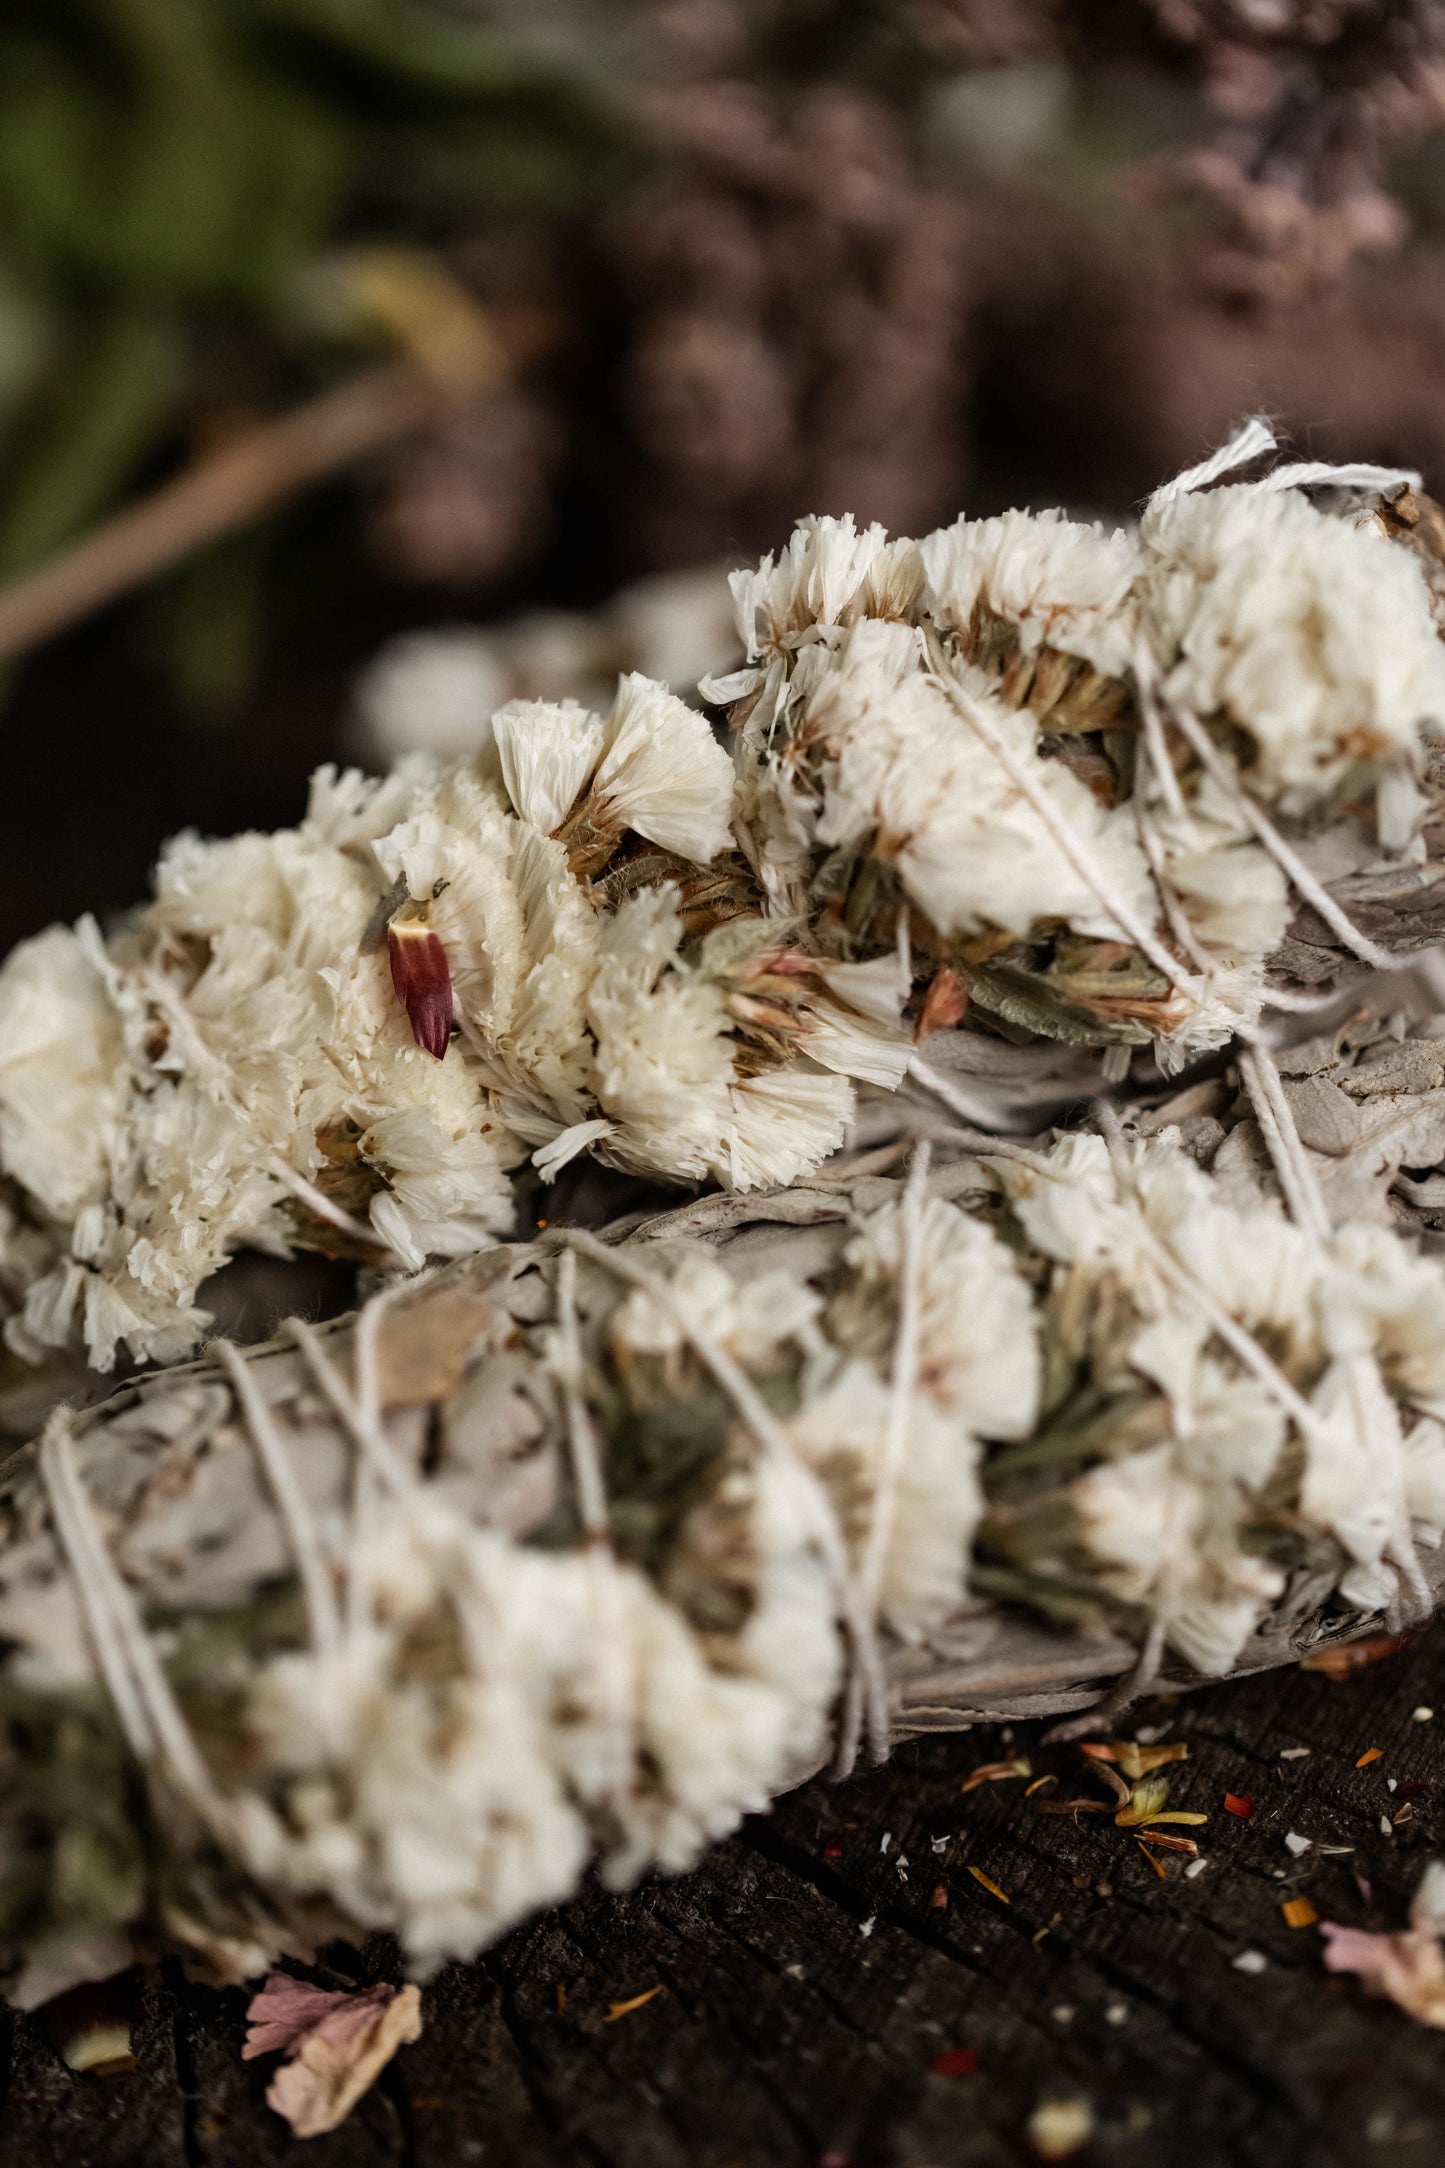 Organic White Sage & White Sinuata Flower Herbal Bundle for invoking Lunar Energies, Compassion, Gentleness, and Femininity